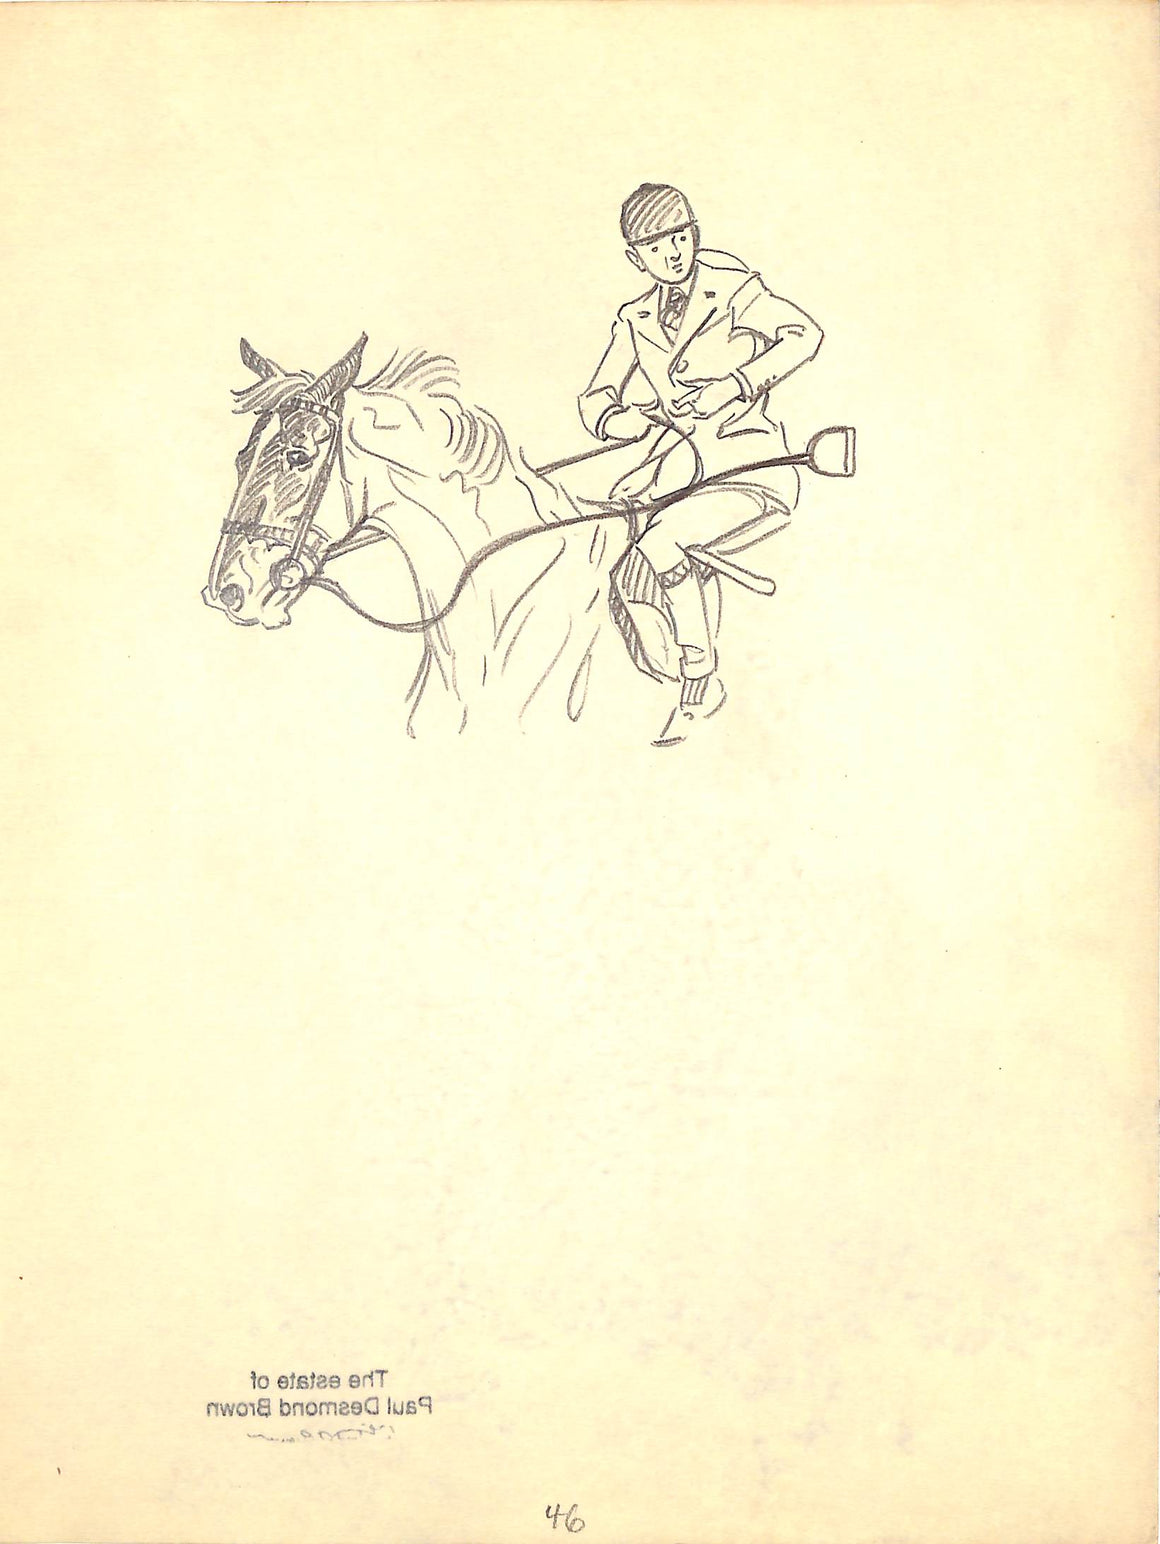 Original 1944 Pencil Drawing From Hi, Guy! The Cinderella Horse By Paul Brown 4